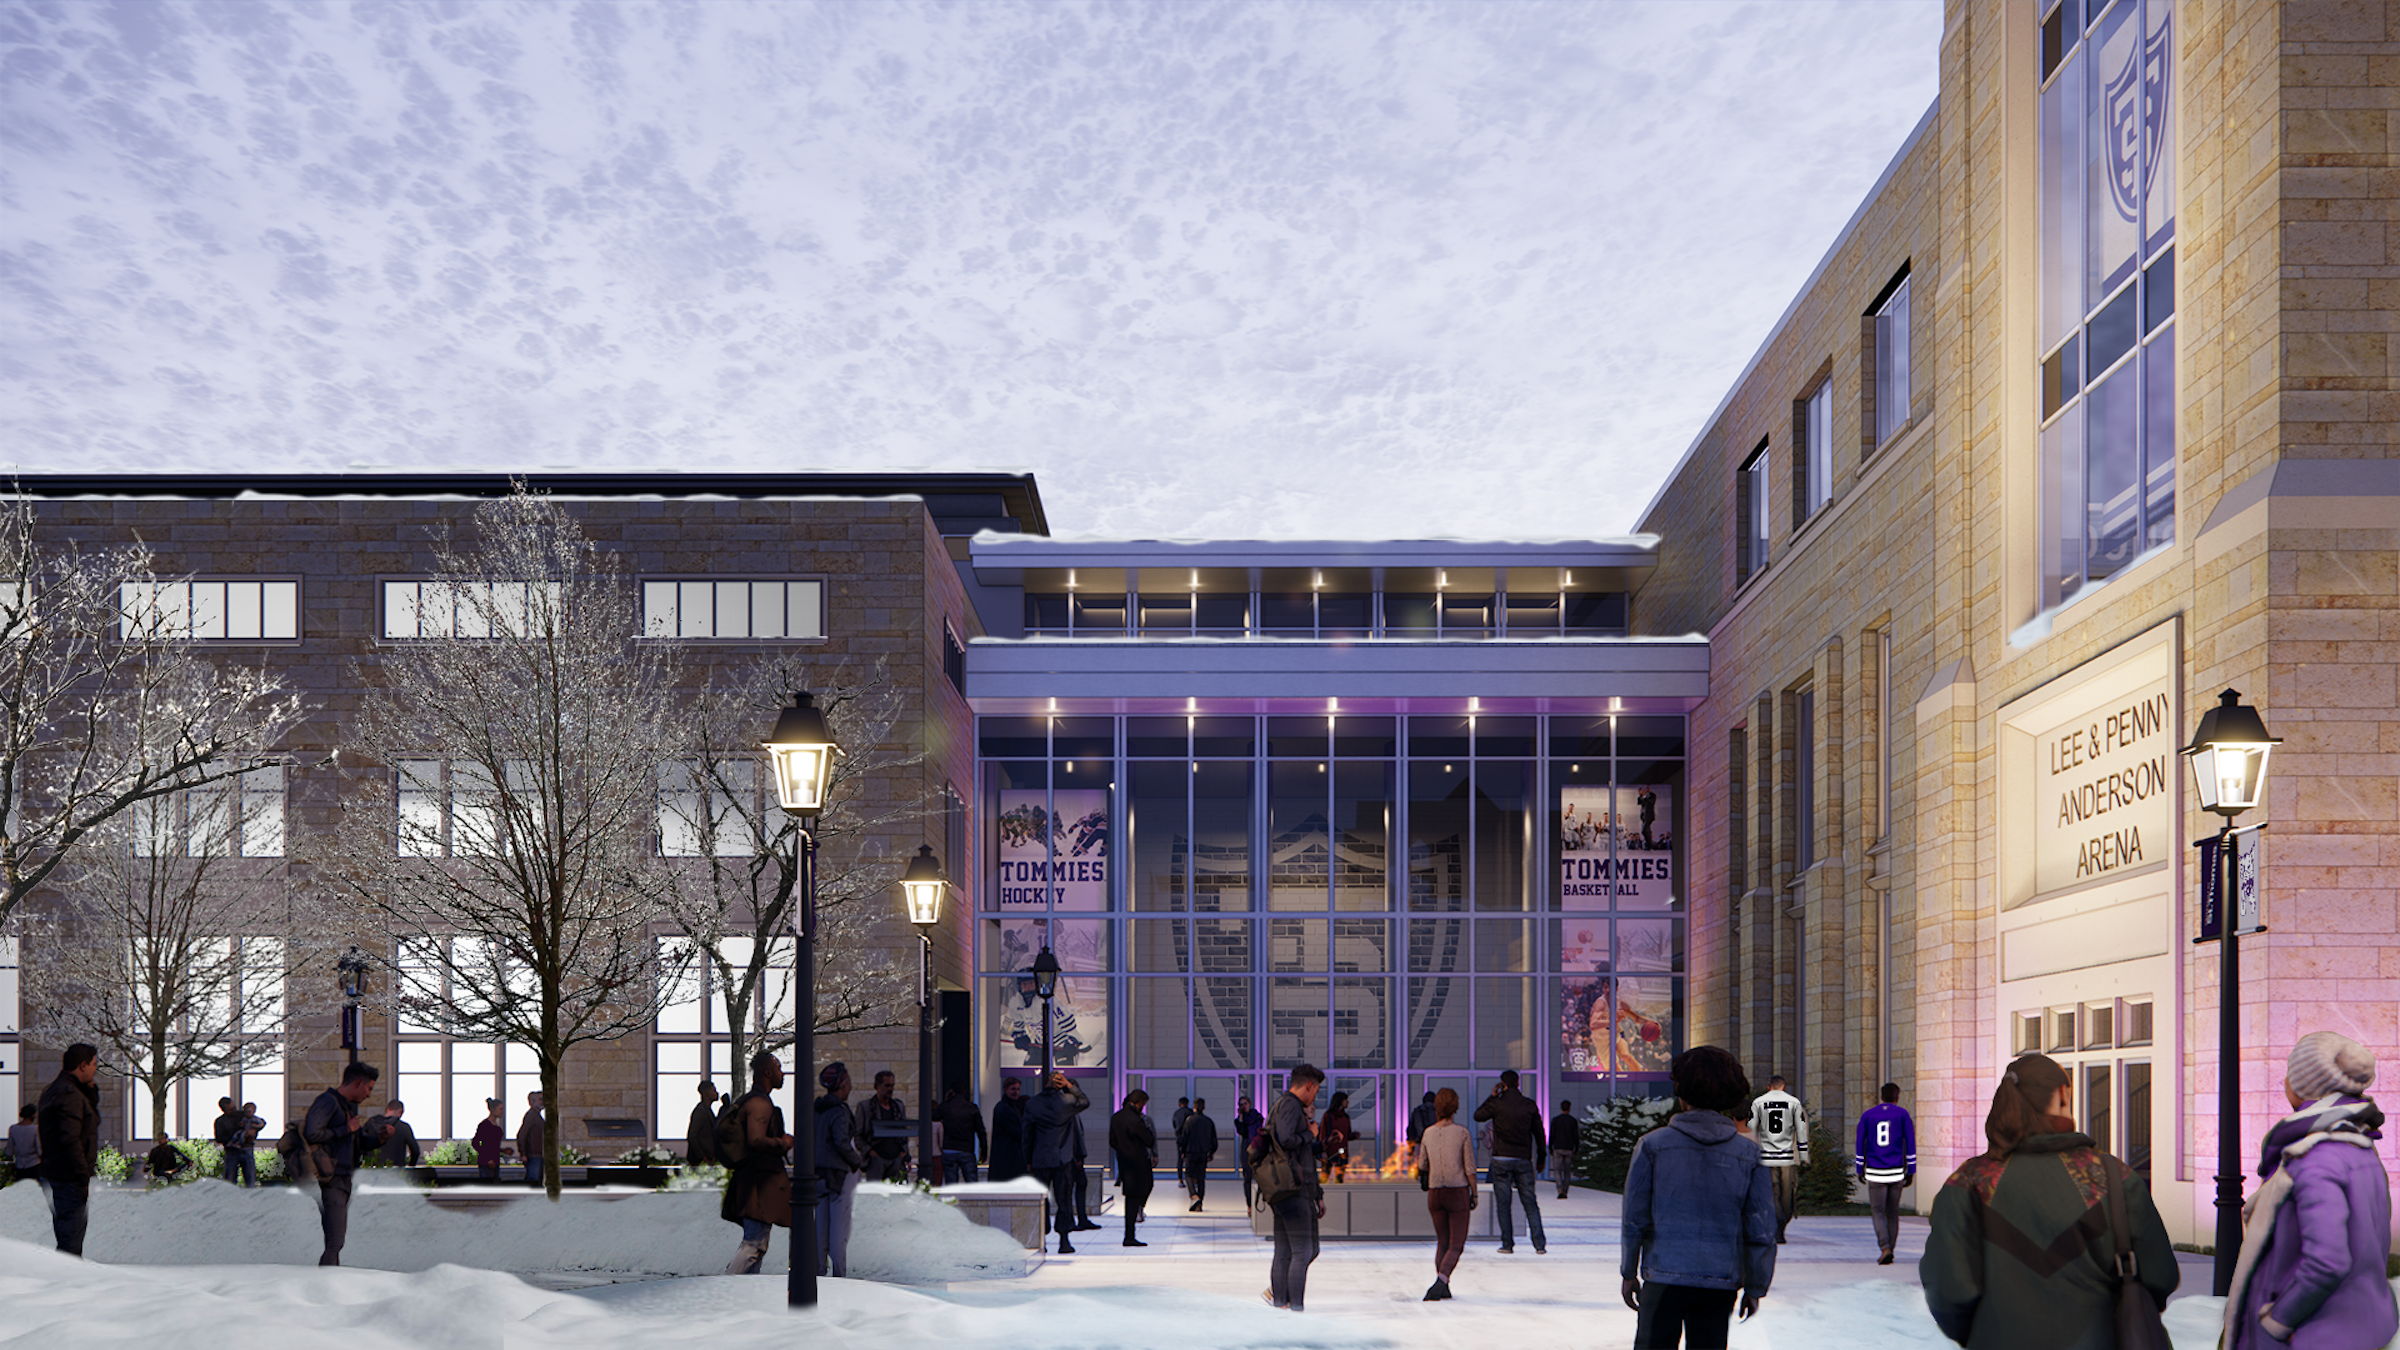 University of St. Thomas Lee and Penny Anderson Arena Renderings courtesy Ryan Companies, Crawford Architects Tower Entry Winter View